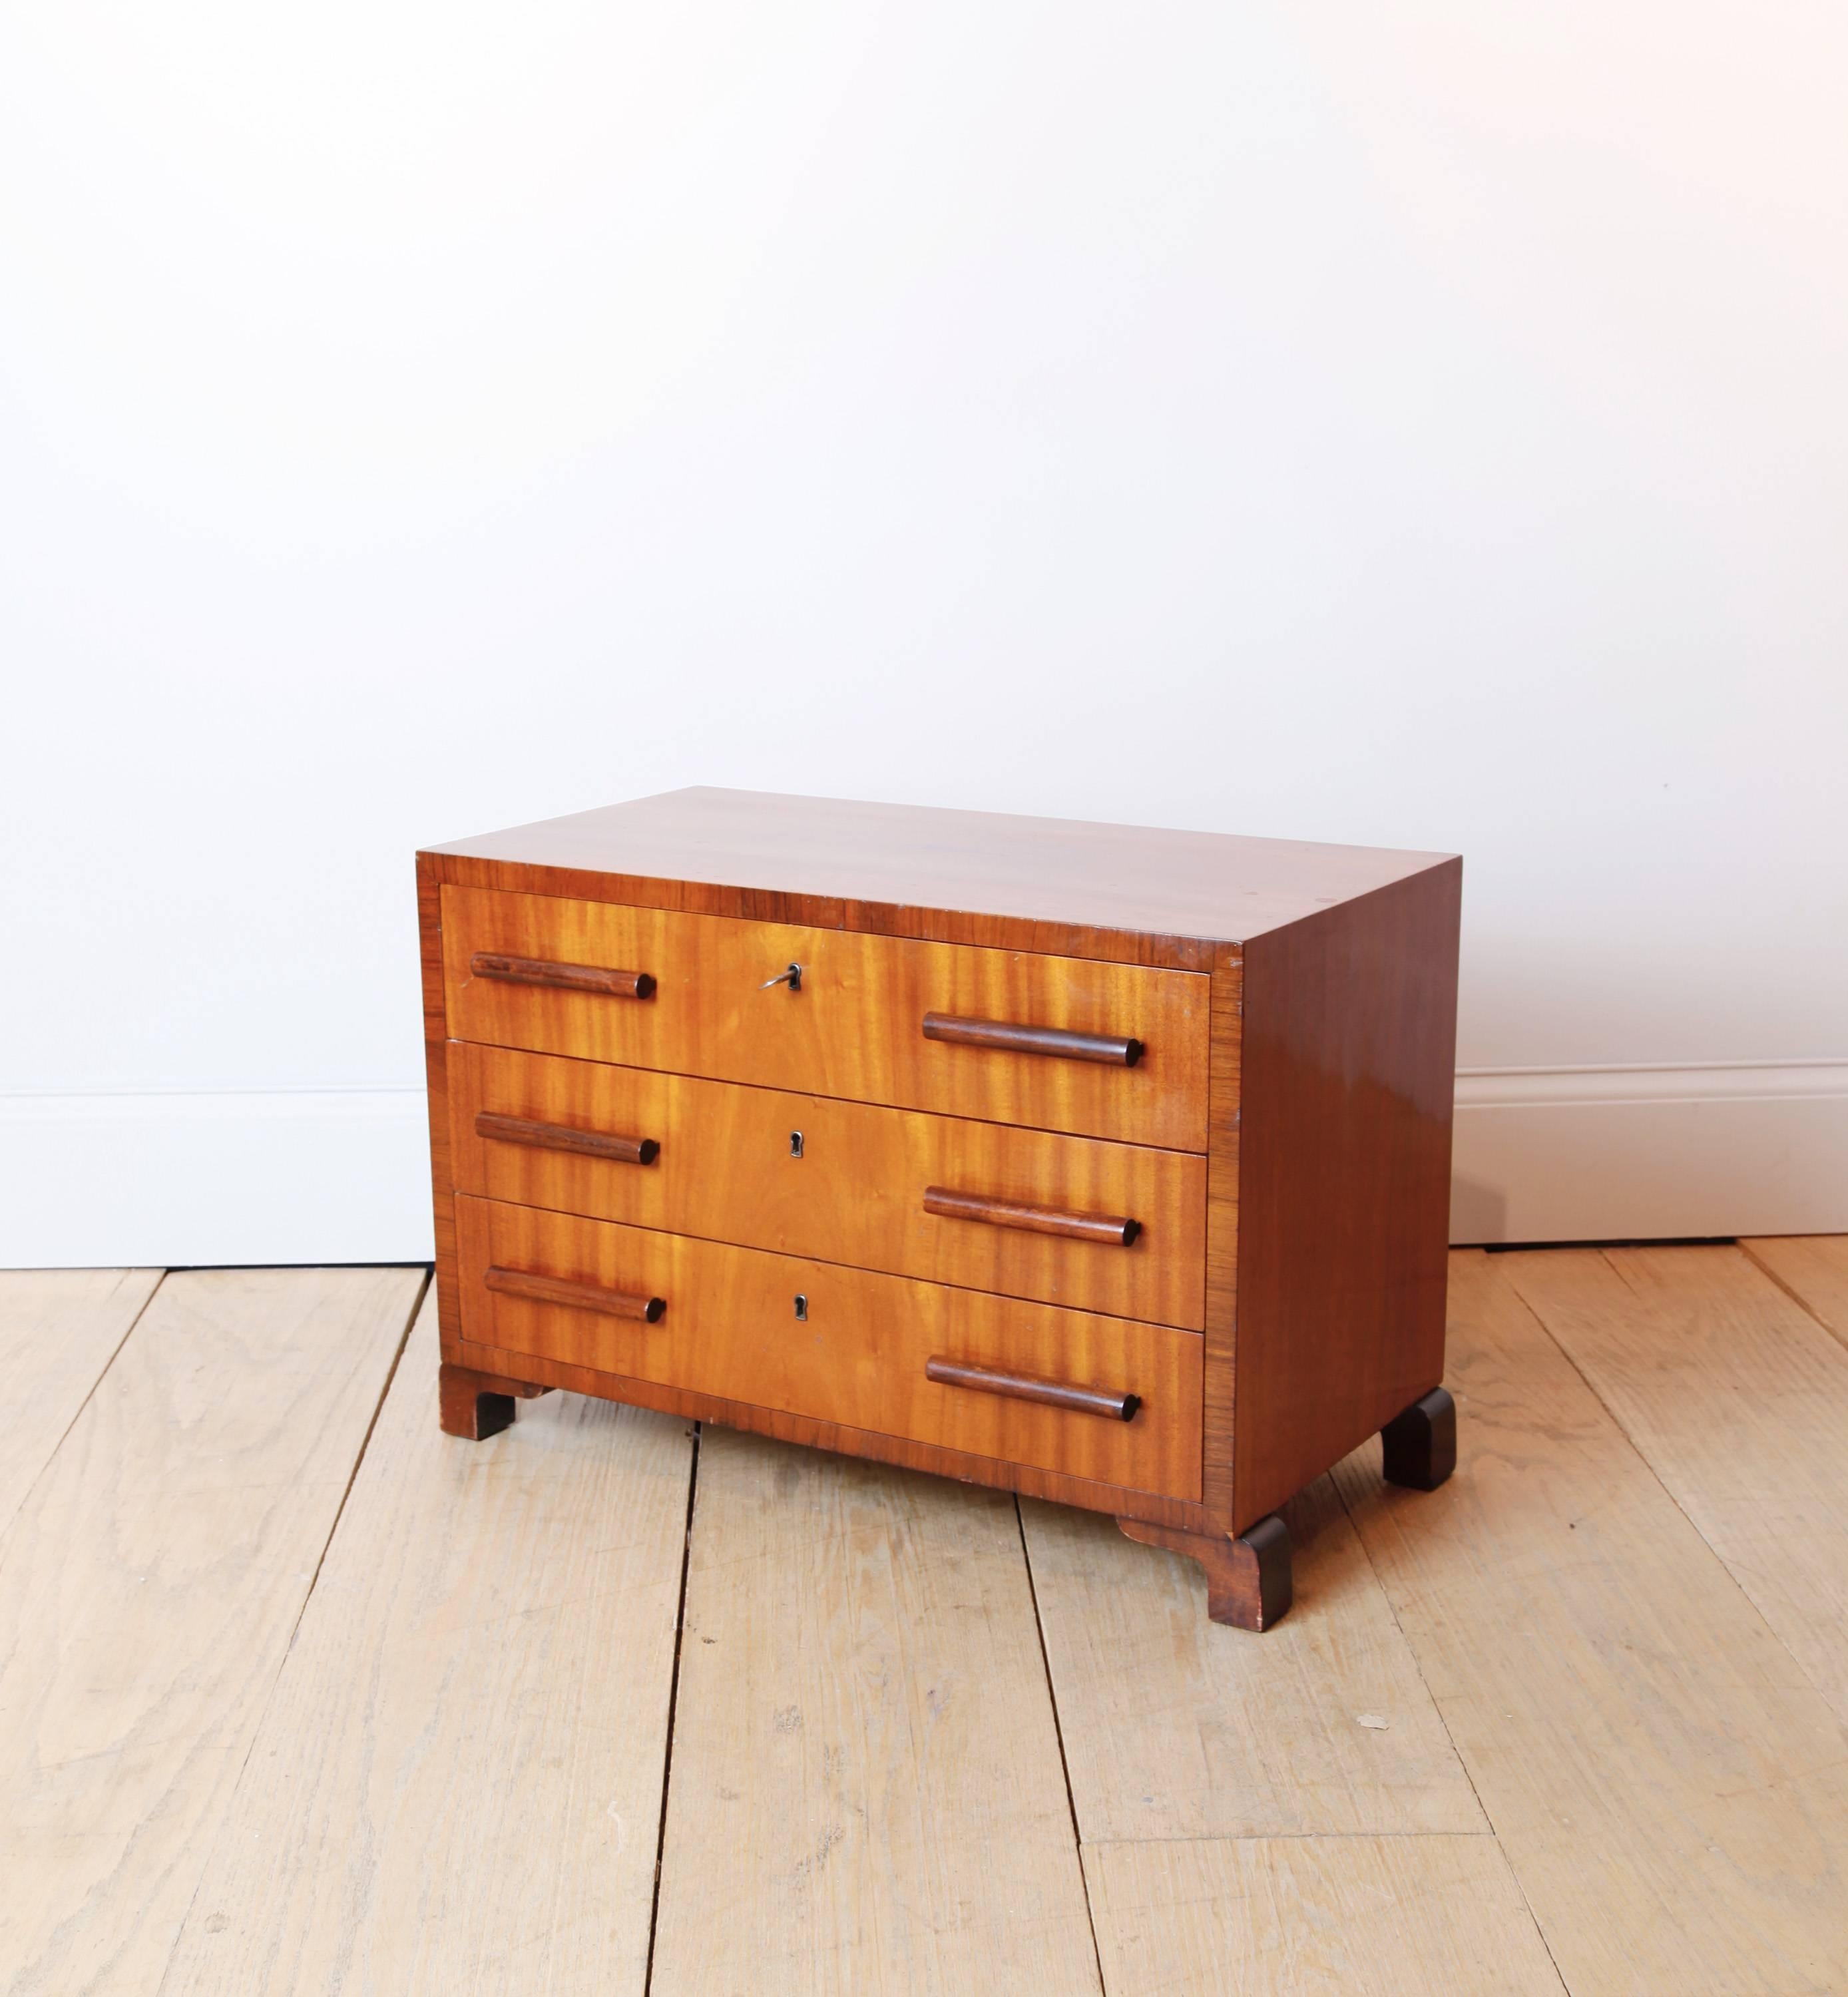 An exquisite small chest with three drawers, of mahogany and rosewood. Its proportions make it eminently suitable as a side table.